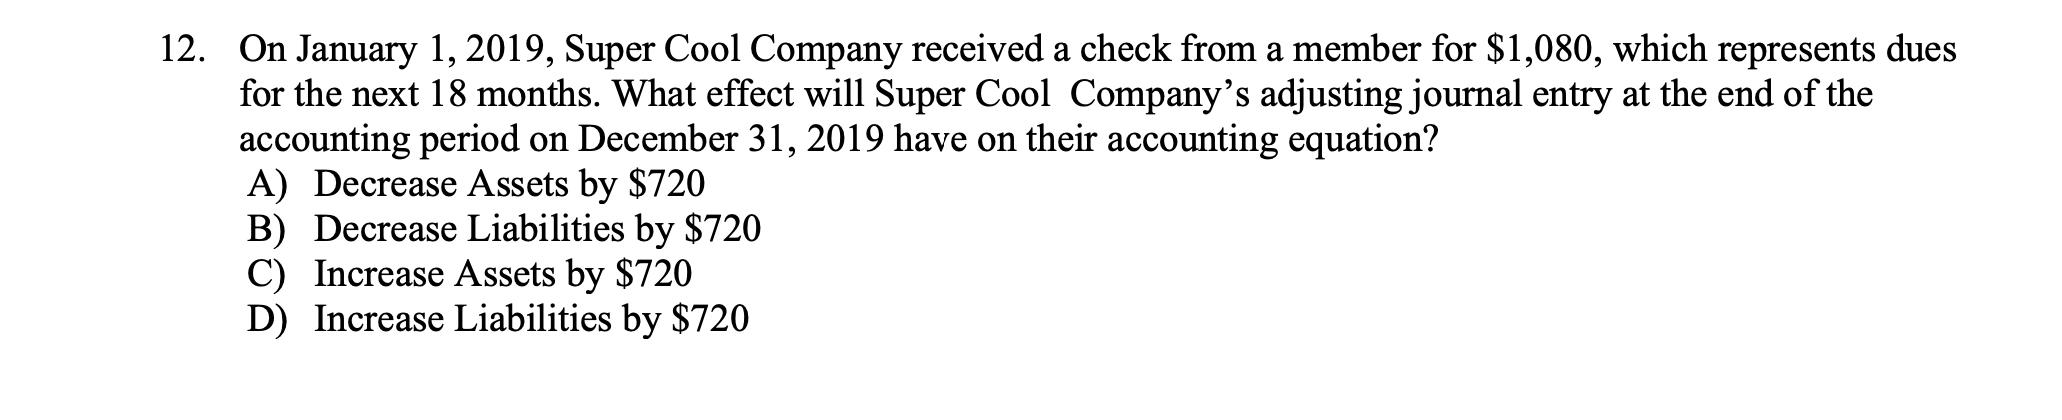 a12. On January 1, 2019, Super Cool Company received a check from a member for $1,080, which represents duesfor the next 18